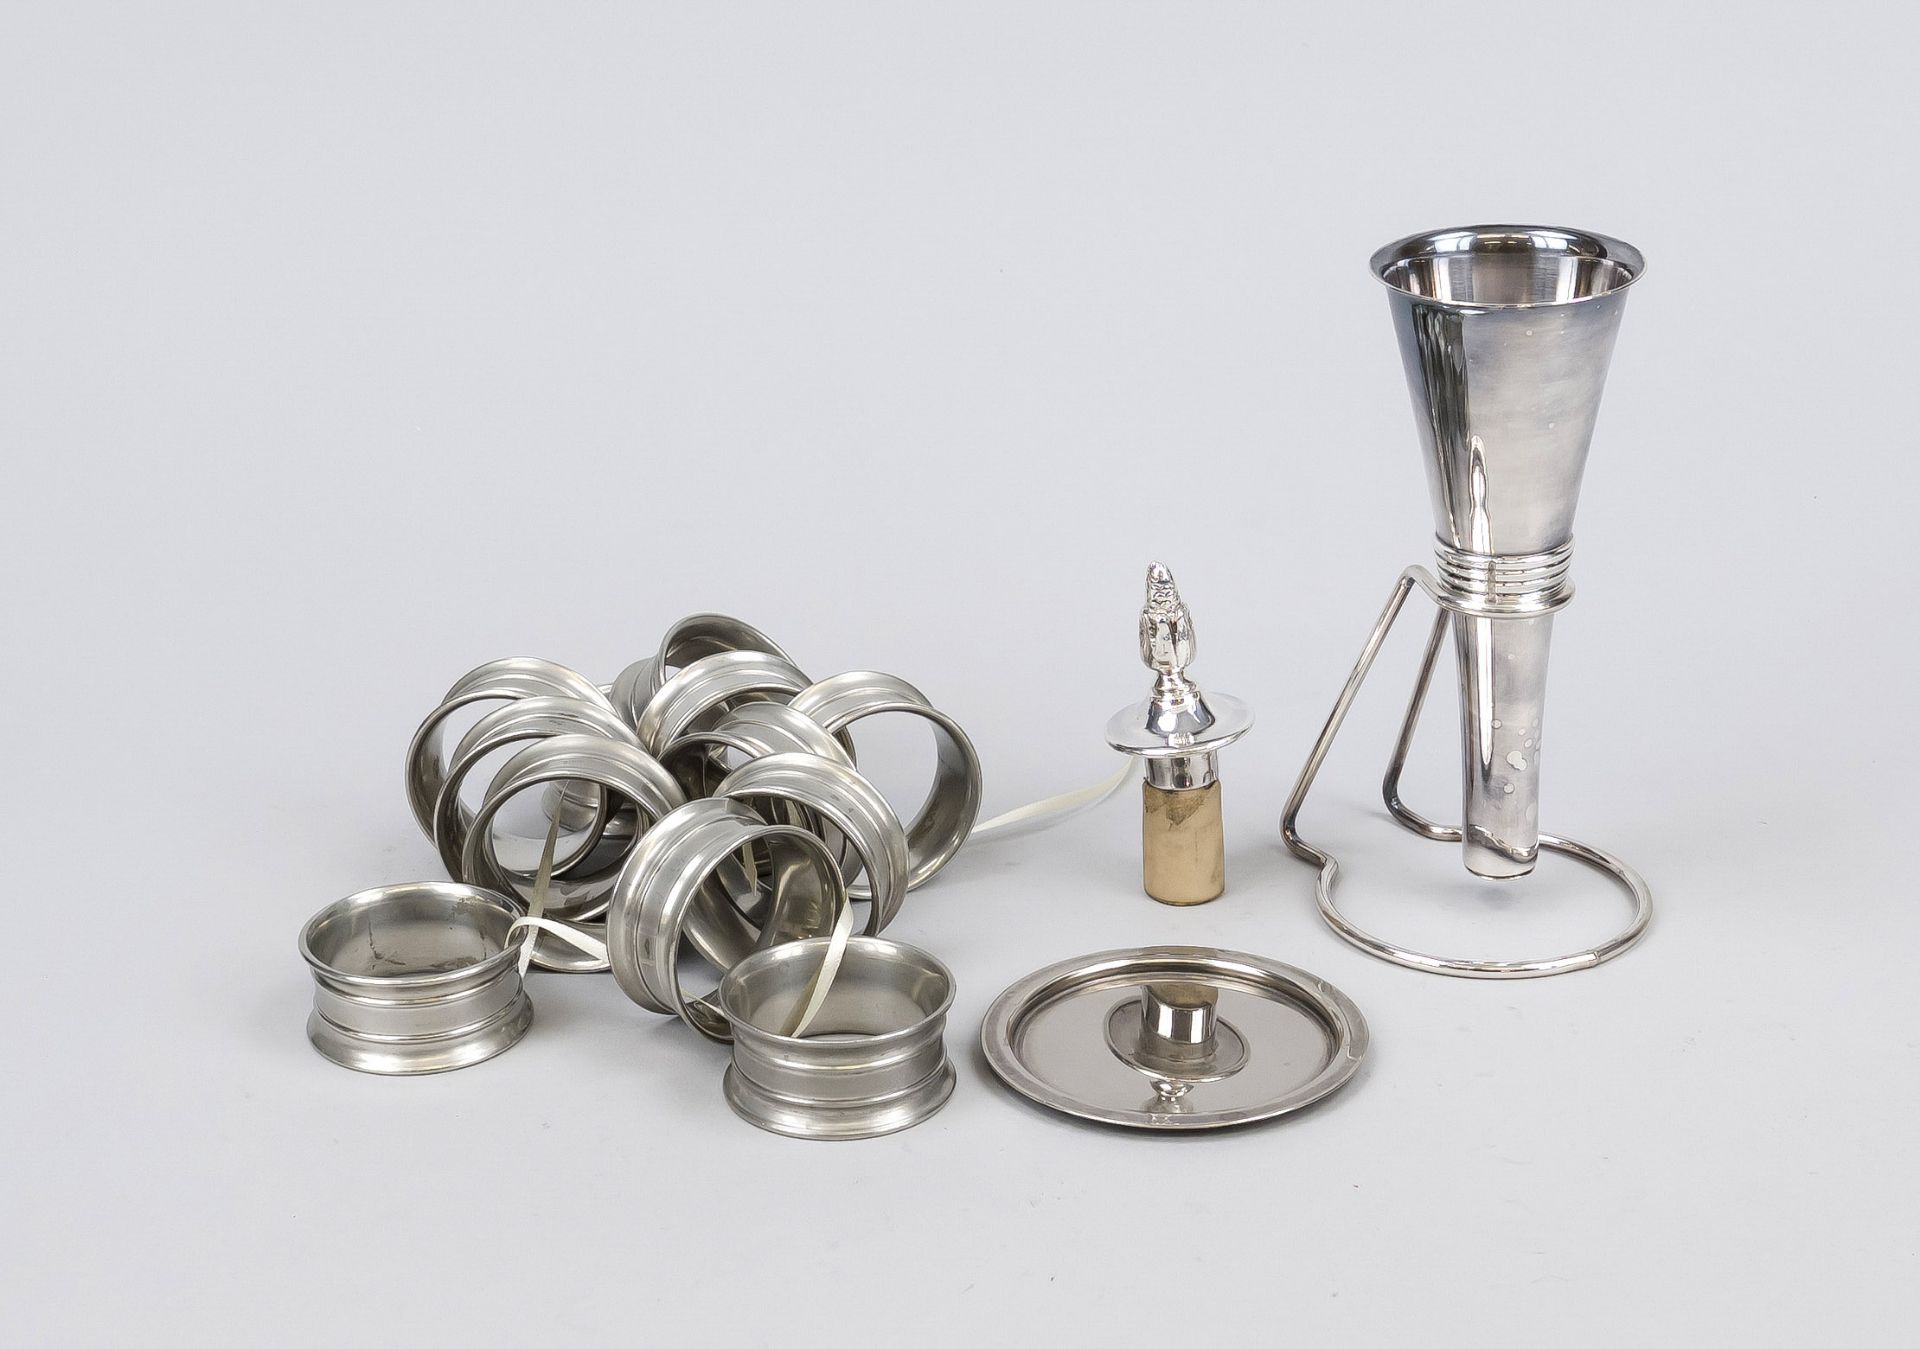 Set for the table, 12 napkin rings (with small monogram engraving PE), 1 wine filter in stand with